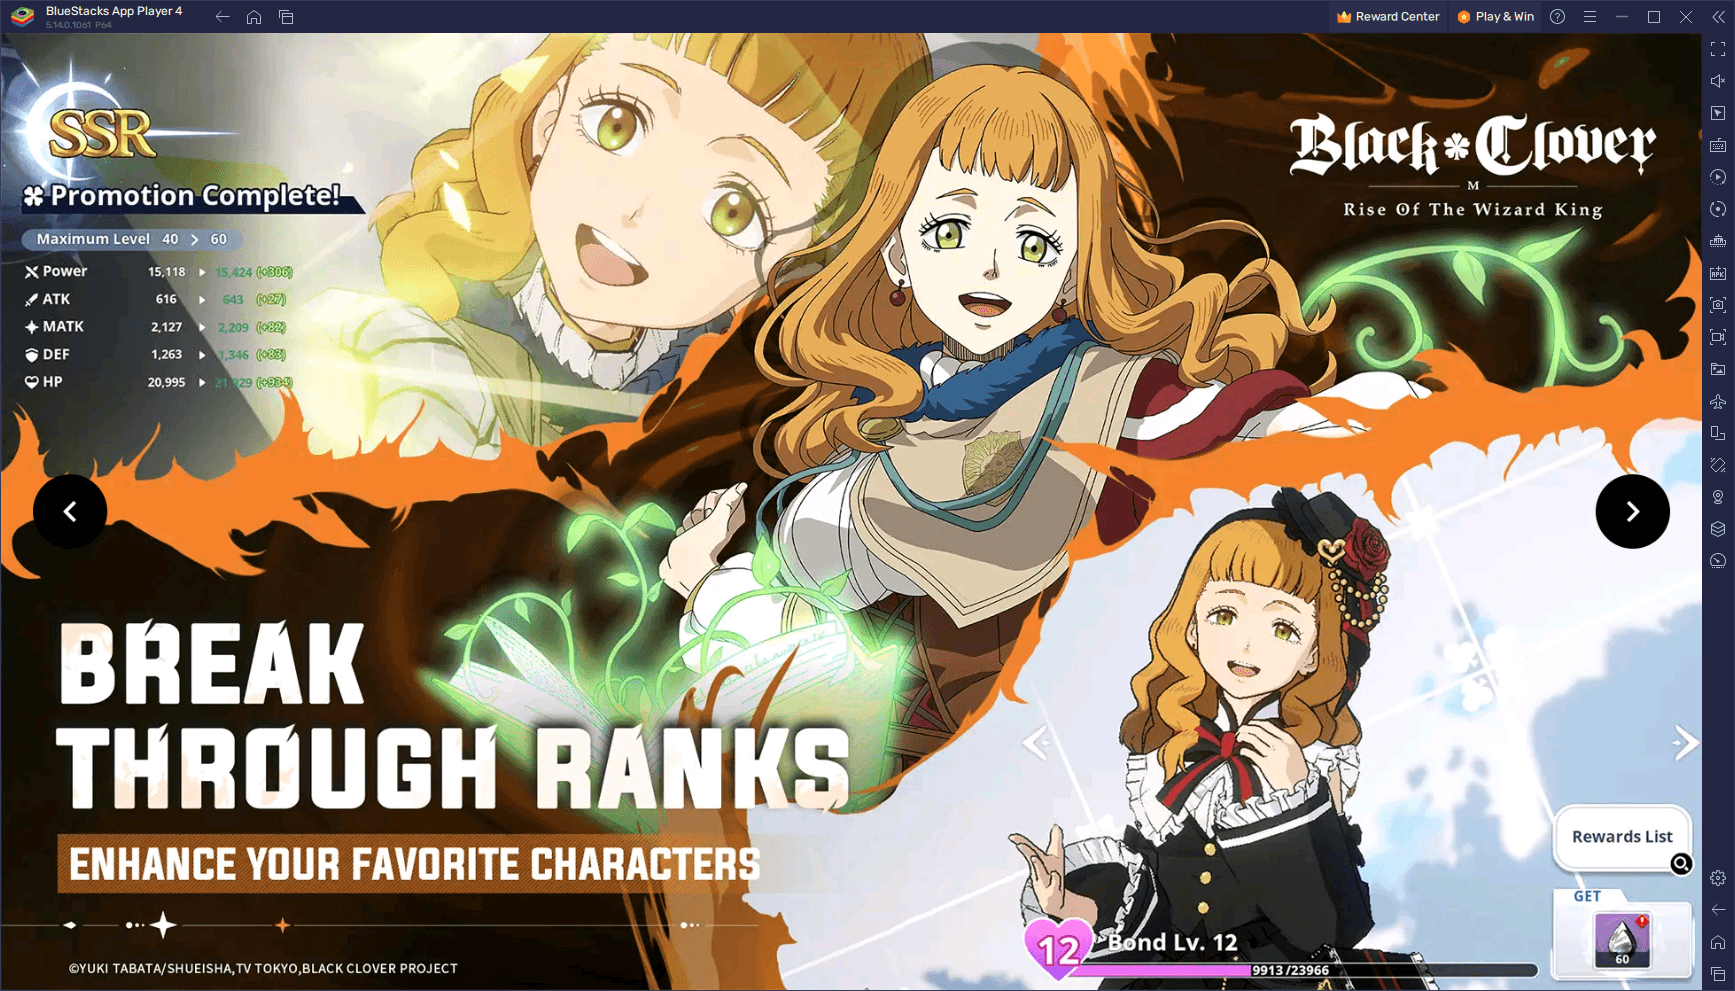 The Best Reroll Guide for Black Clover M - Optimize Your Start in This New Gacha RPG